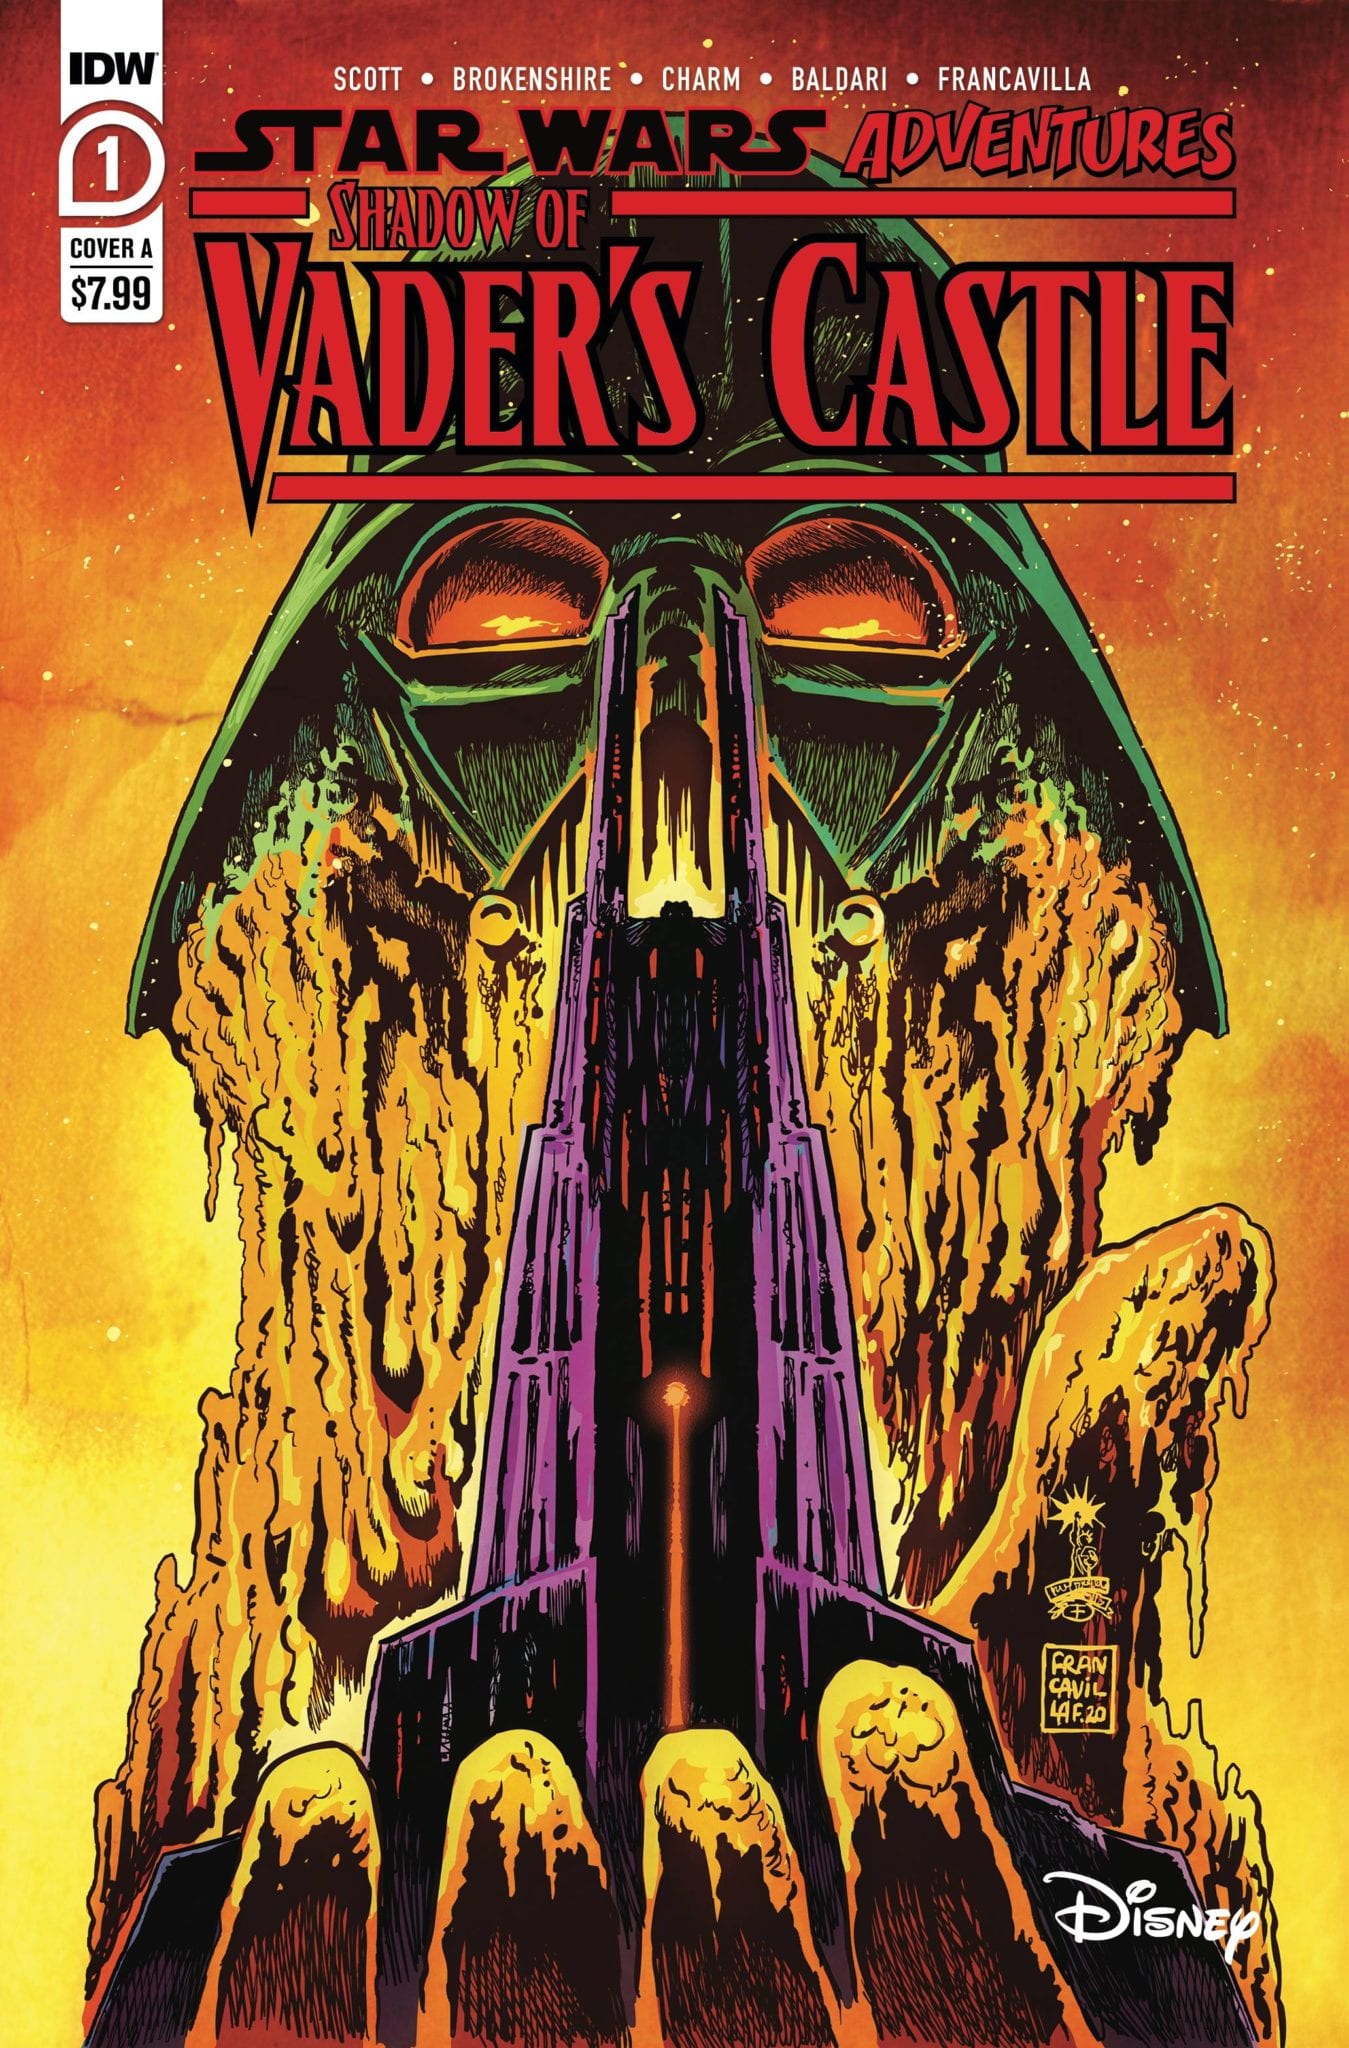 Star-Wars-Adv-Shadow-Of-Vaders-Castle